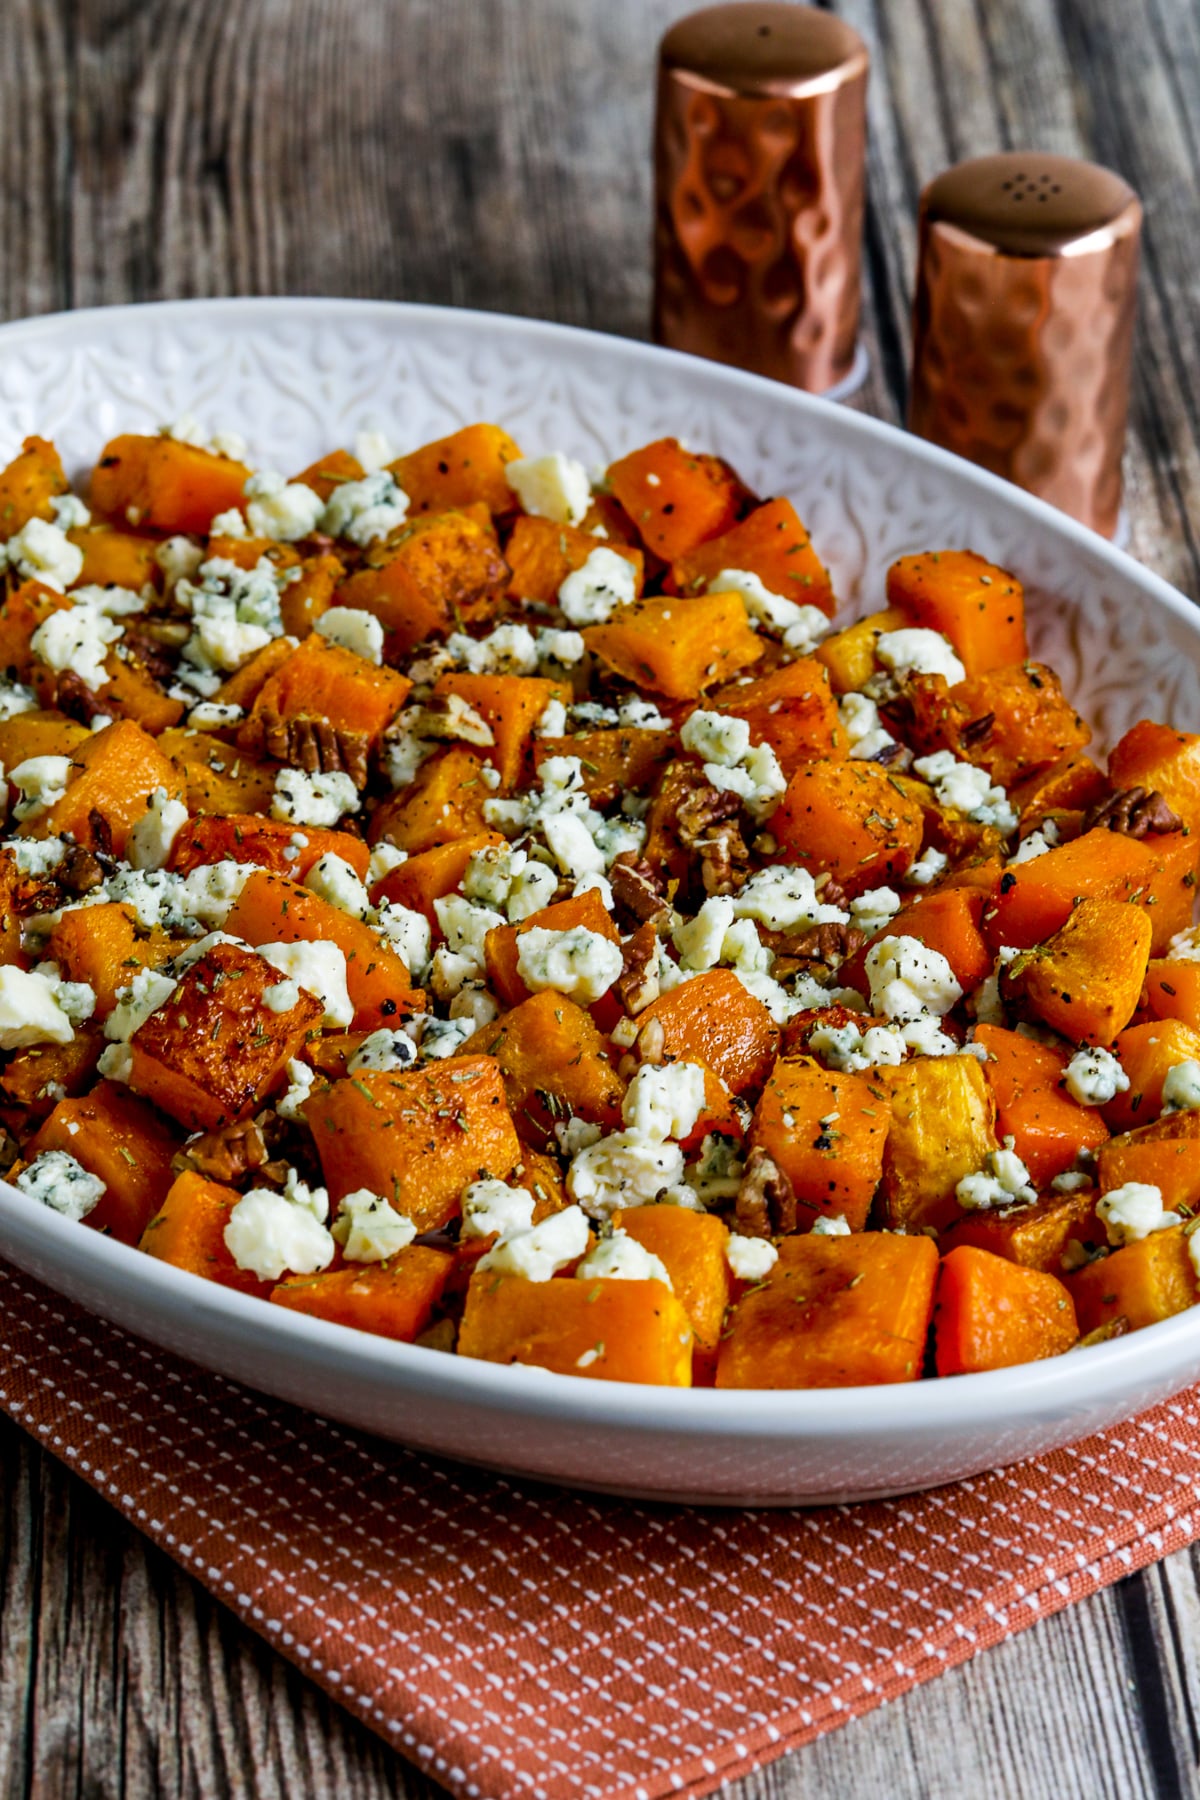 Roasted Butternut Squash with Rosemary, Pecans, and Gorgonzola shown on serving dish with salt-pepper in background